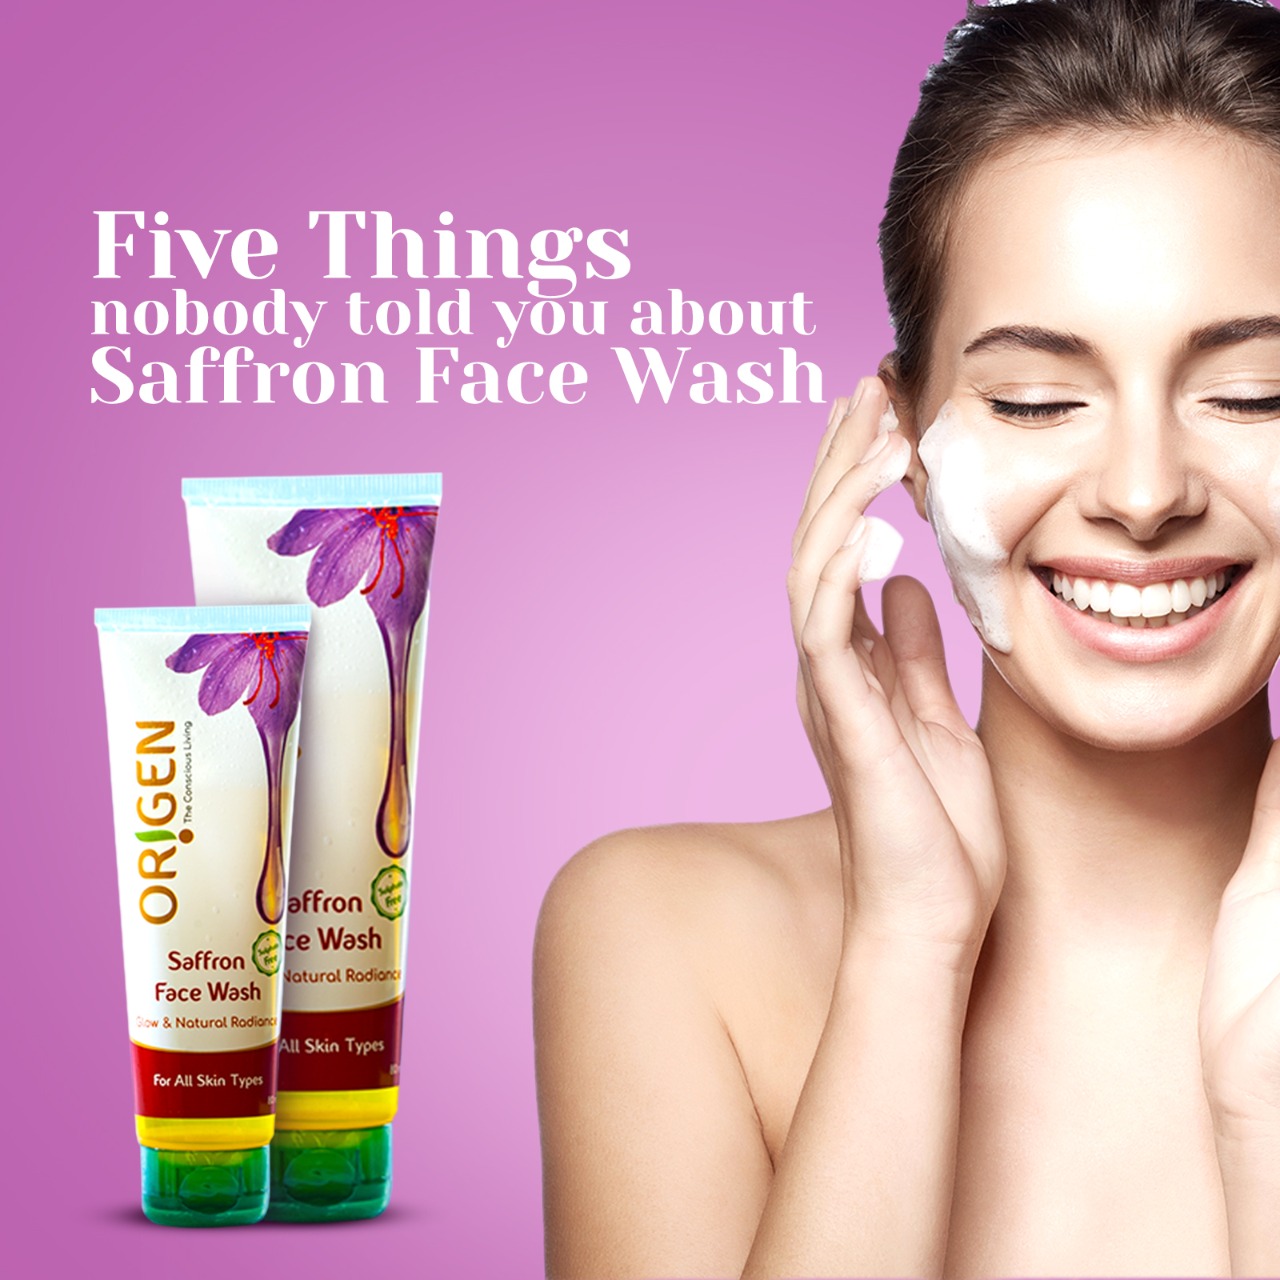 Five Things Nobody Told You About Saffron Face Wash